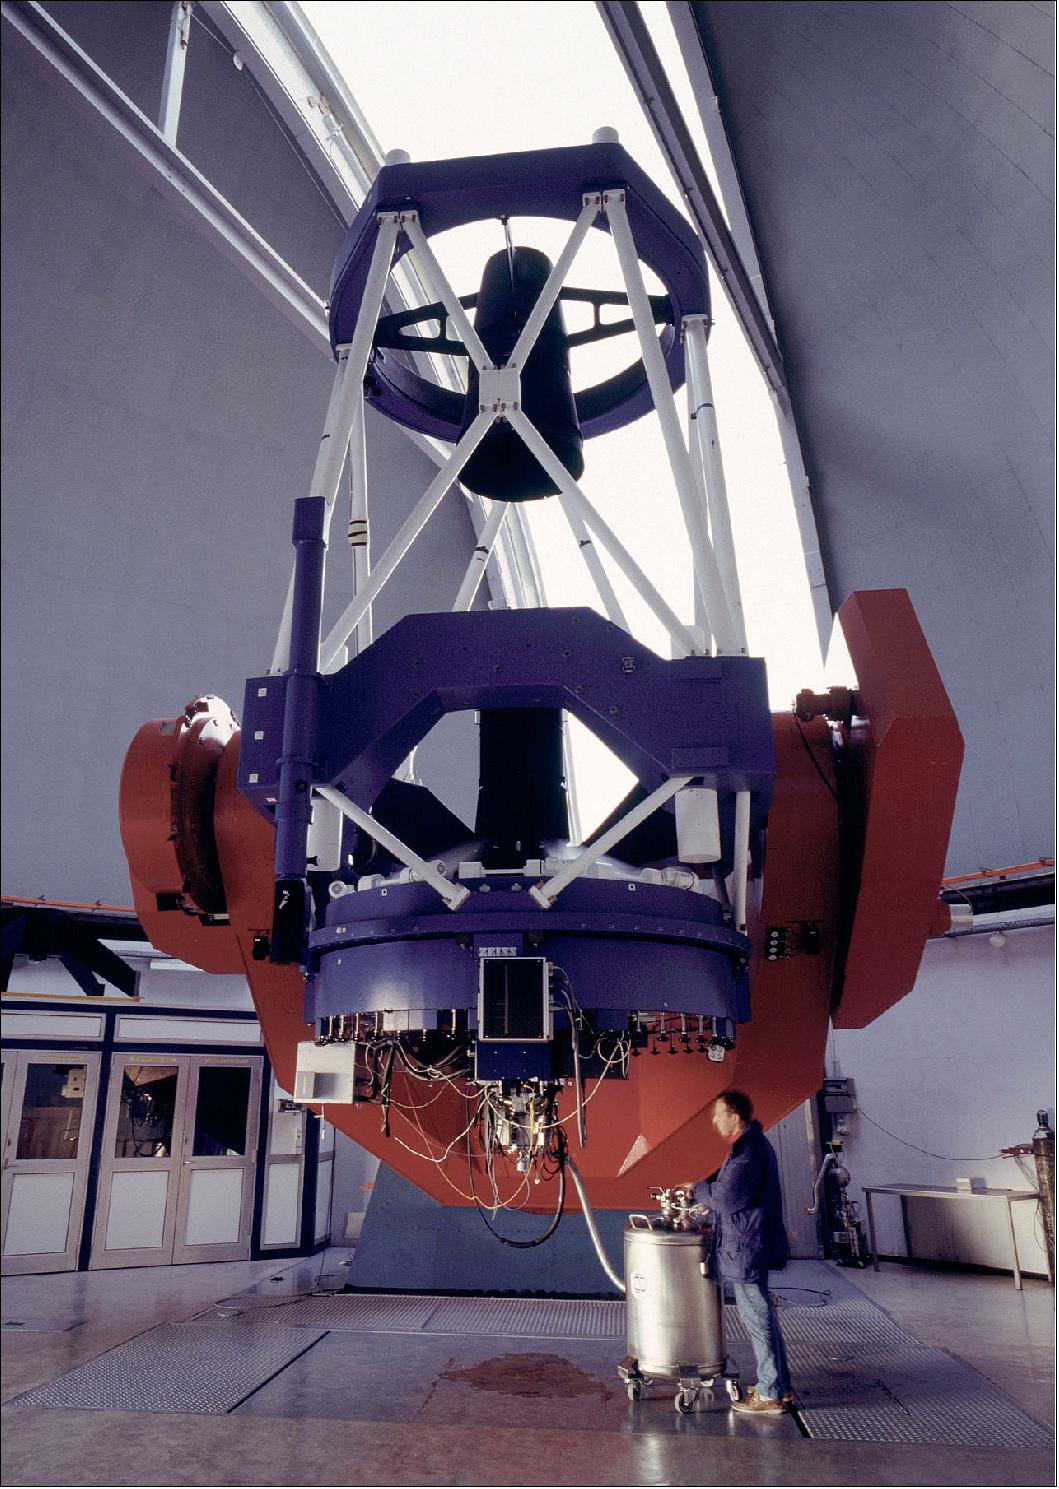 Figure 6: The MPG/ESO 2.2-meter telescope at La Silla has been in operation since early 1984. Operation and maintenance of the telescope was the responsibility of ESO until September 2013. The telescope (which is a fork mounted Ritchey-Chretien) was built by Zeiss and has been in use at La Silla since 1984. It is equipped with WFI, FEROS and GROND (image credit: ESO/H. H. Heyer) 7)